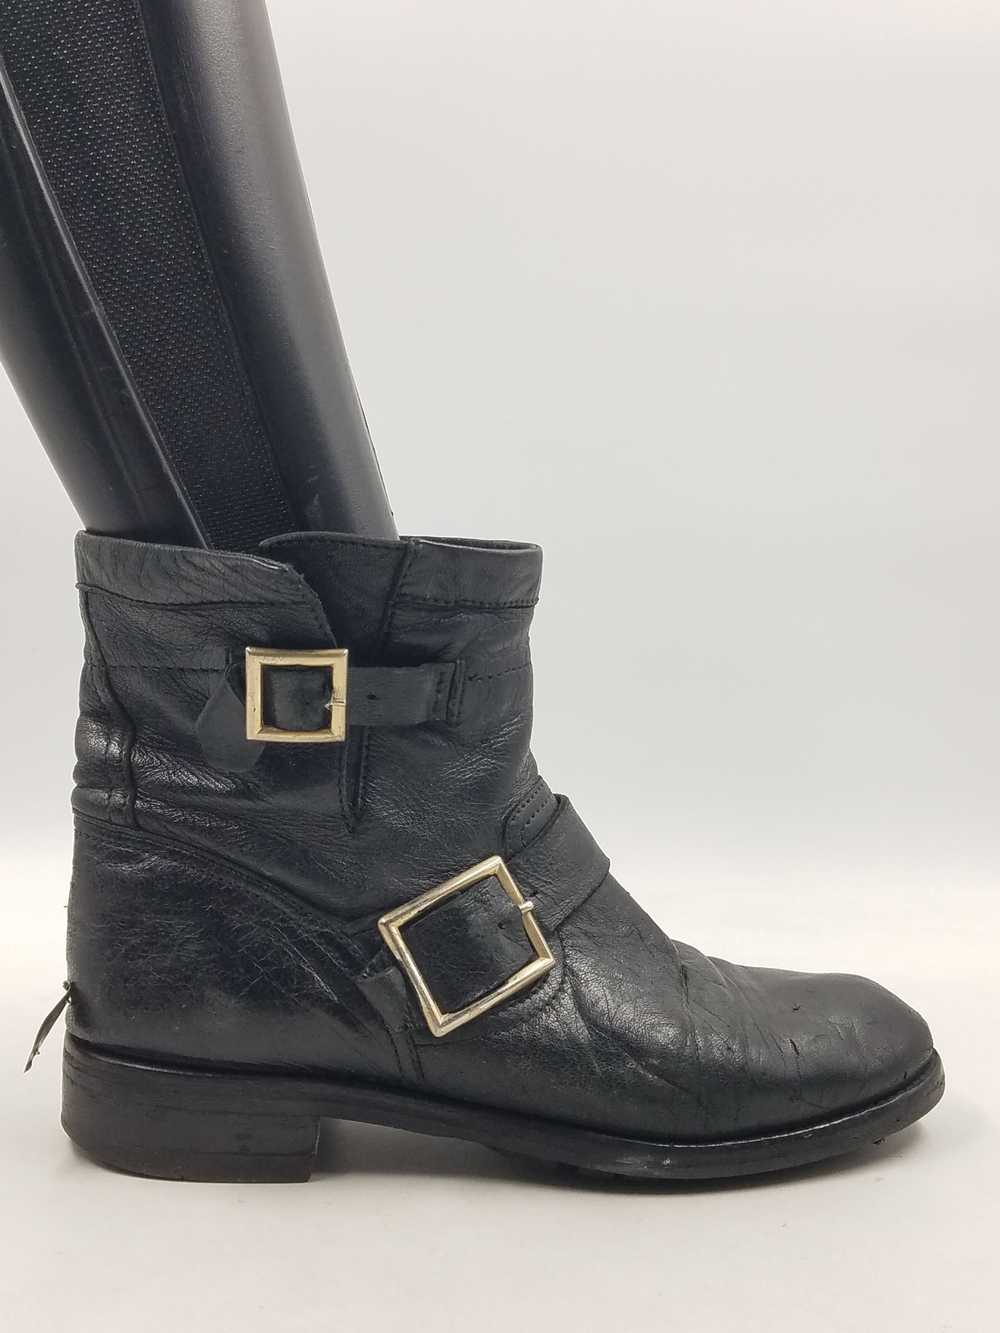 Authentic Jimmy Choo Black Engineer Boot W 8 - image 1